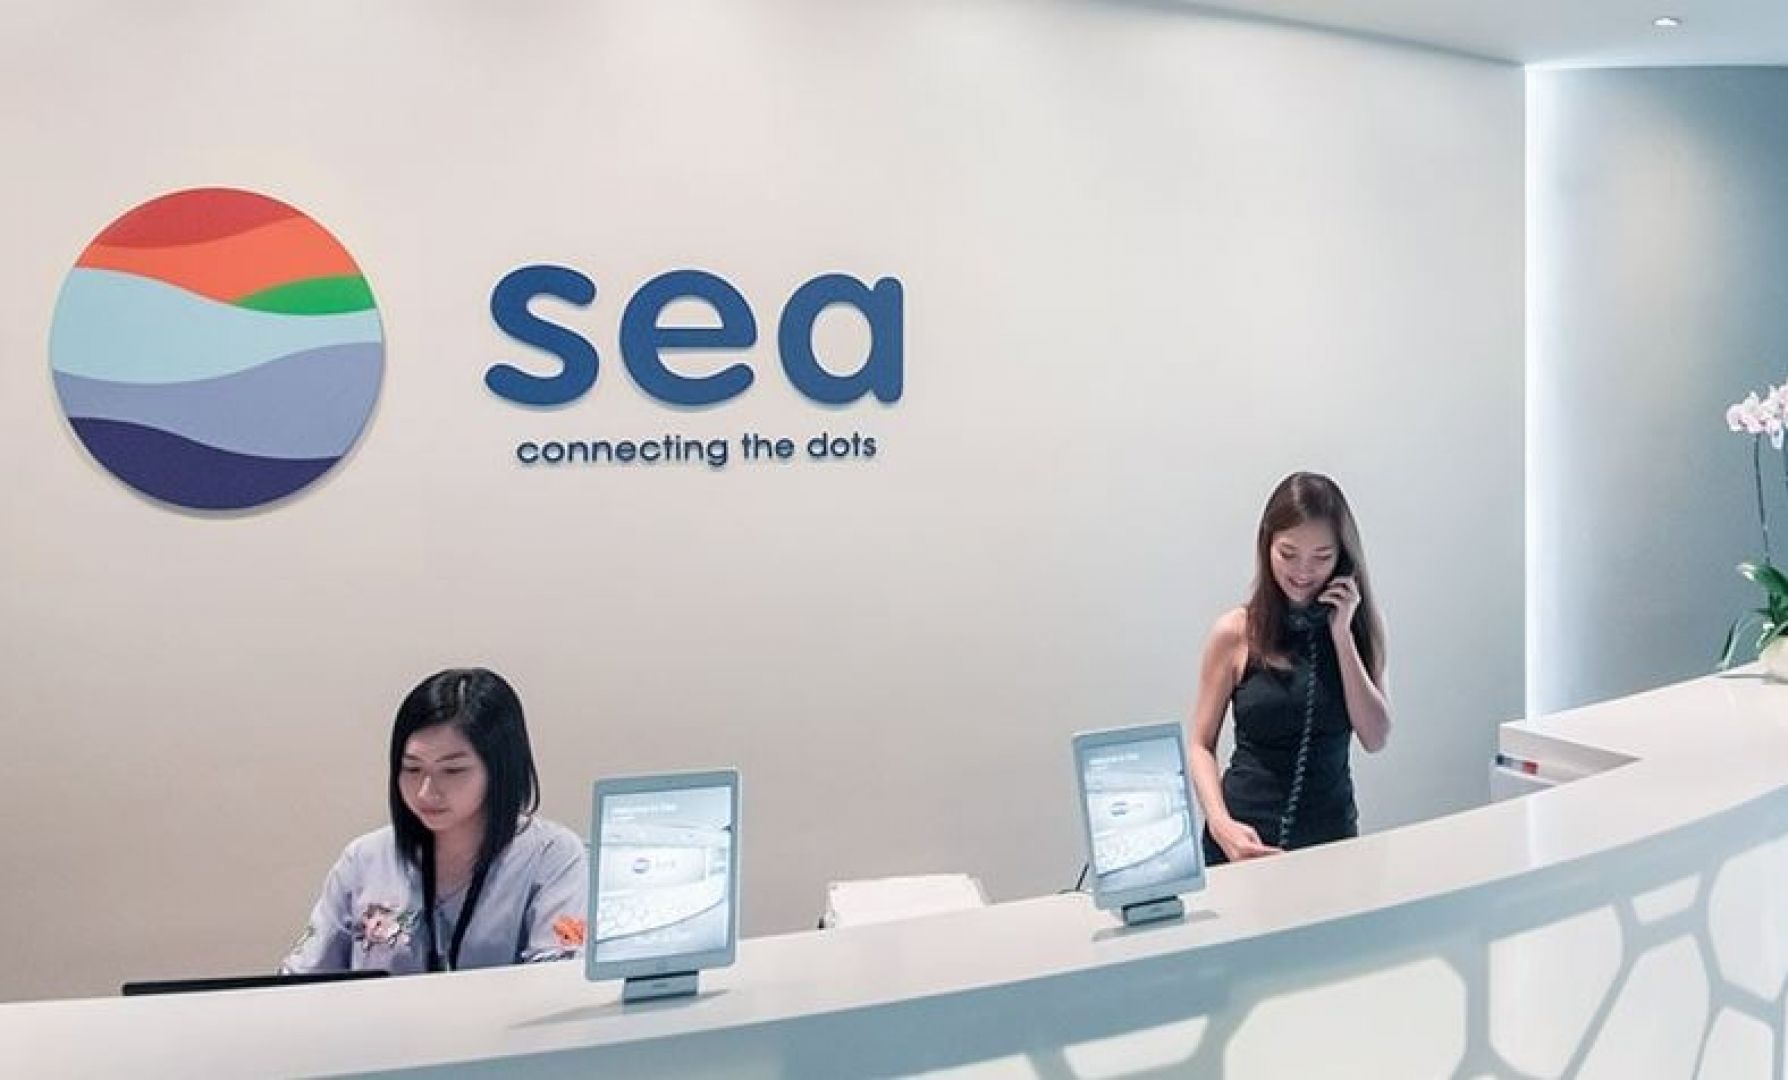 [Updated] Sea Group's Shopee cutting more jobs in Indonesia